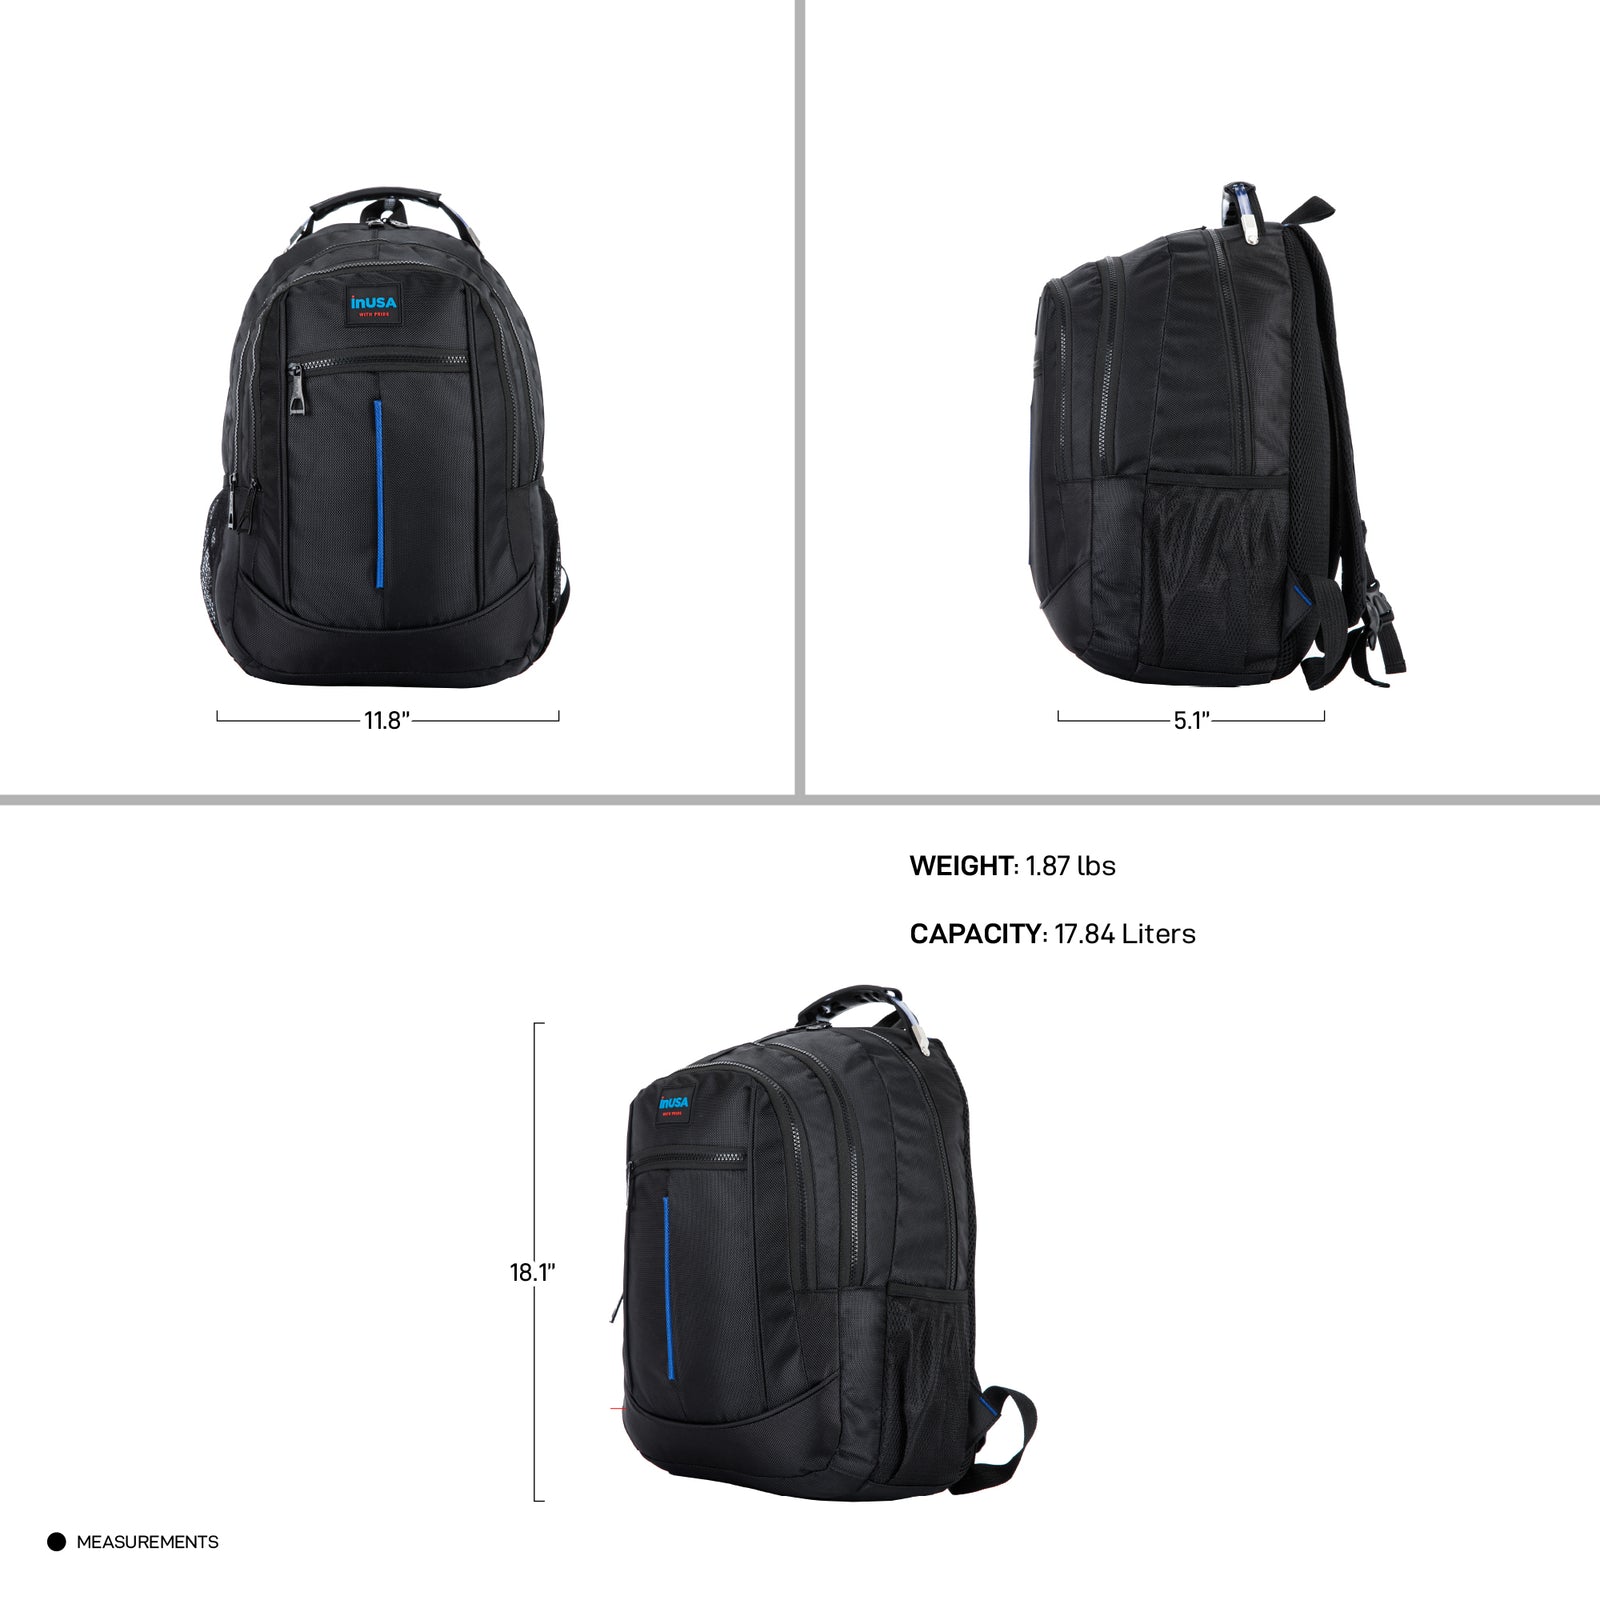 Load image into Gallery viewer, InUSA ROADSTER Executive 15.6-Inch Laptop Backpack